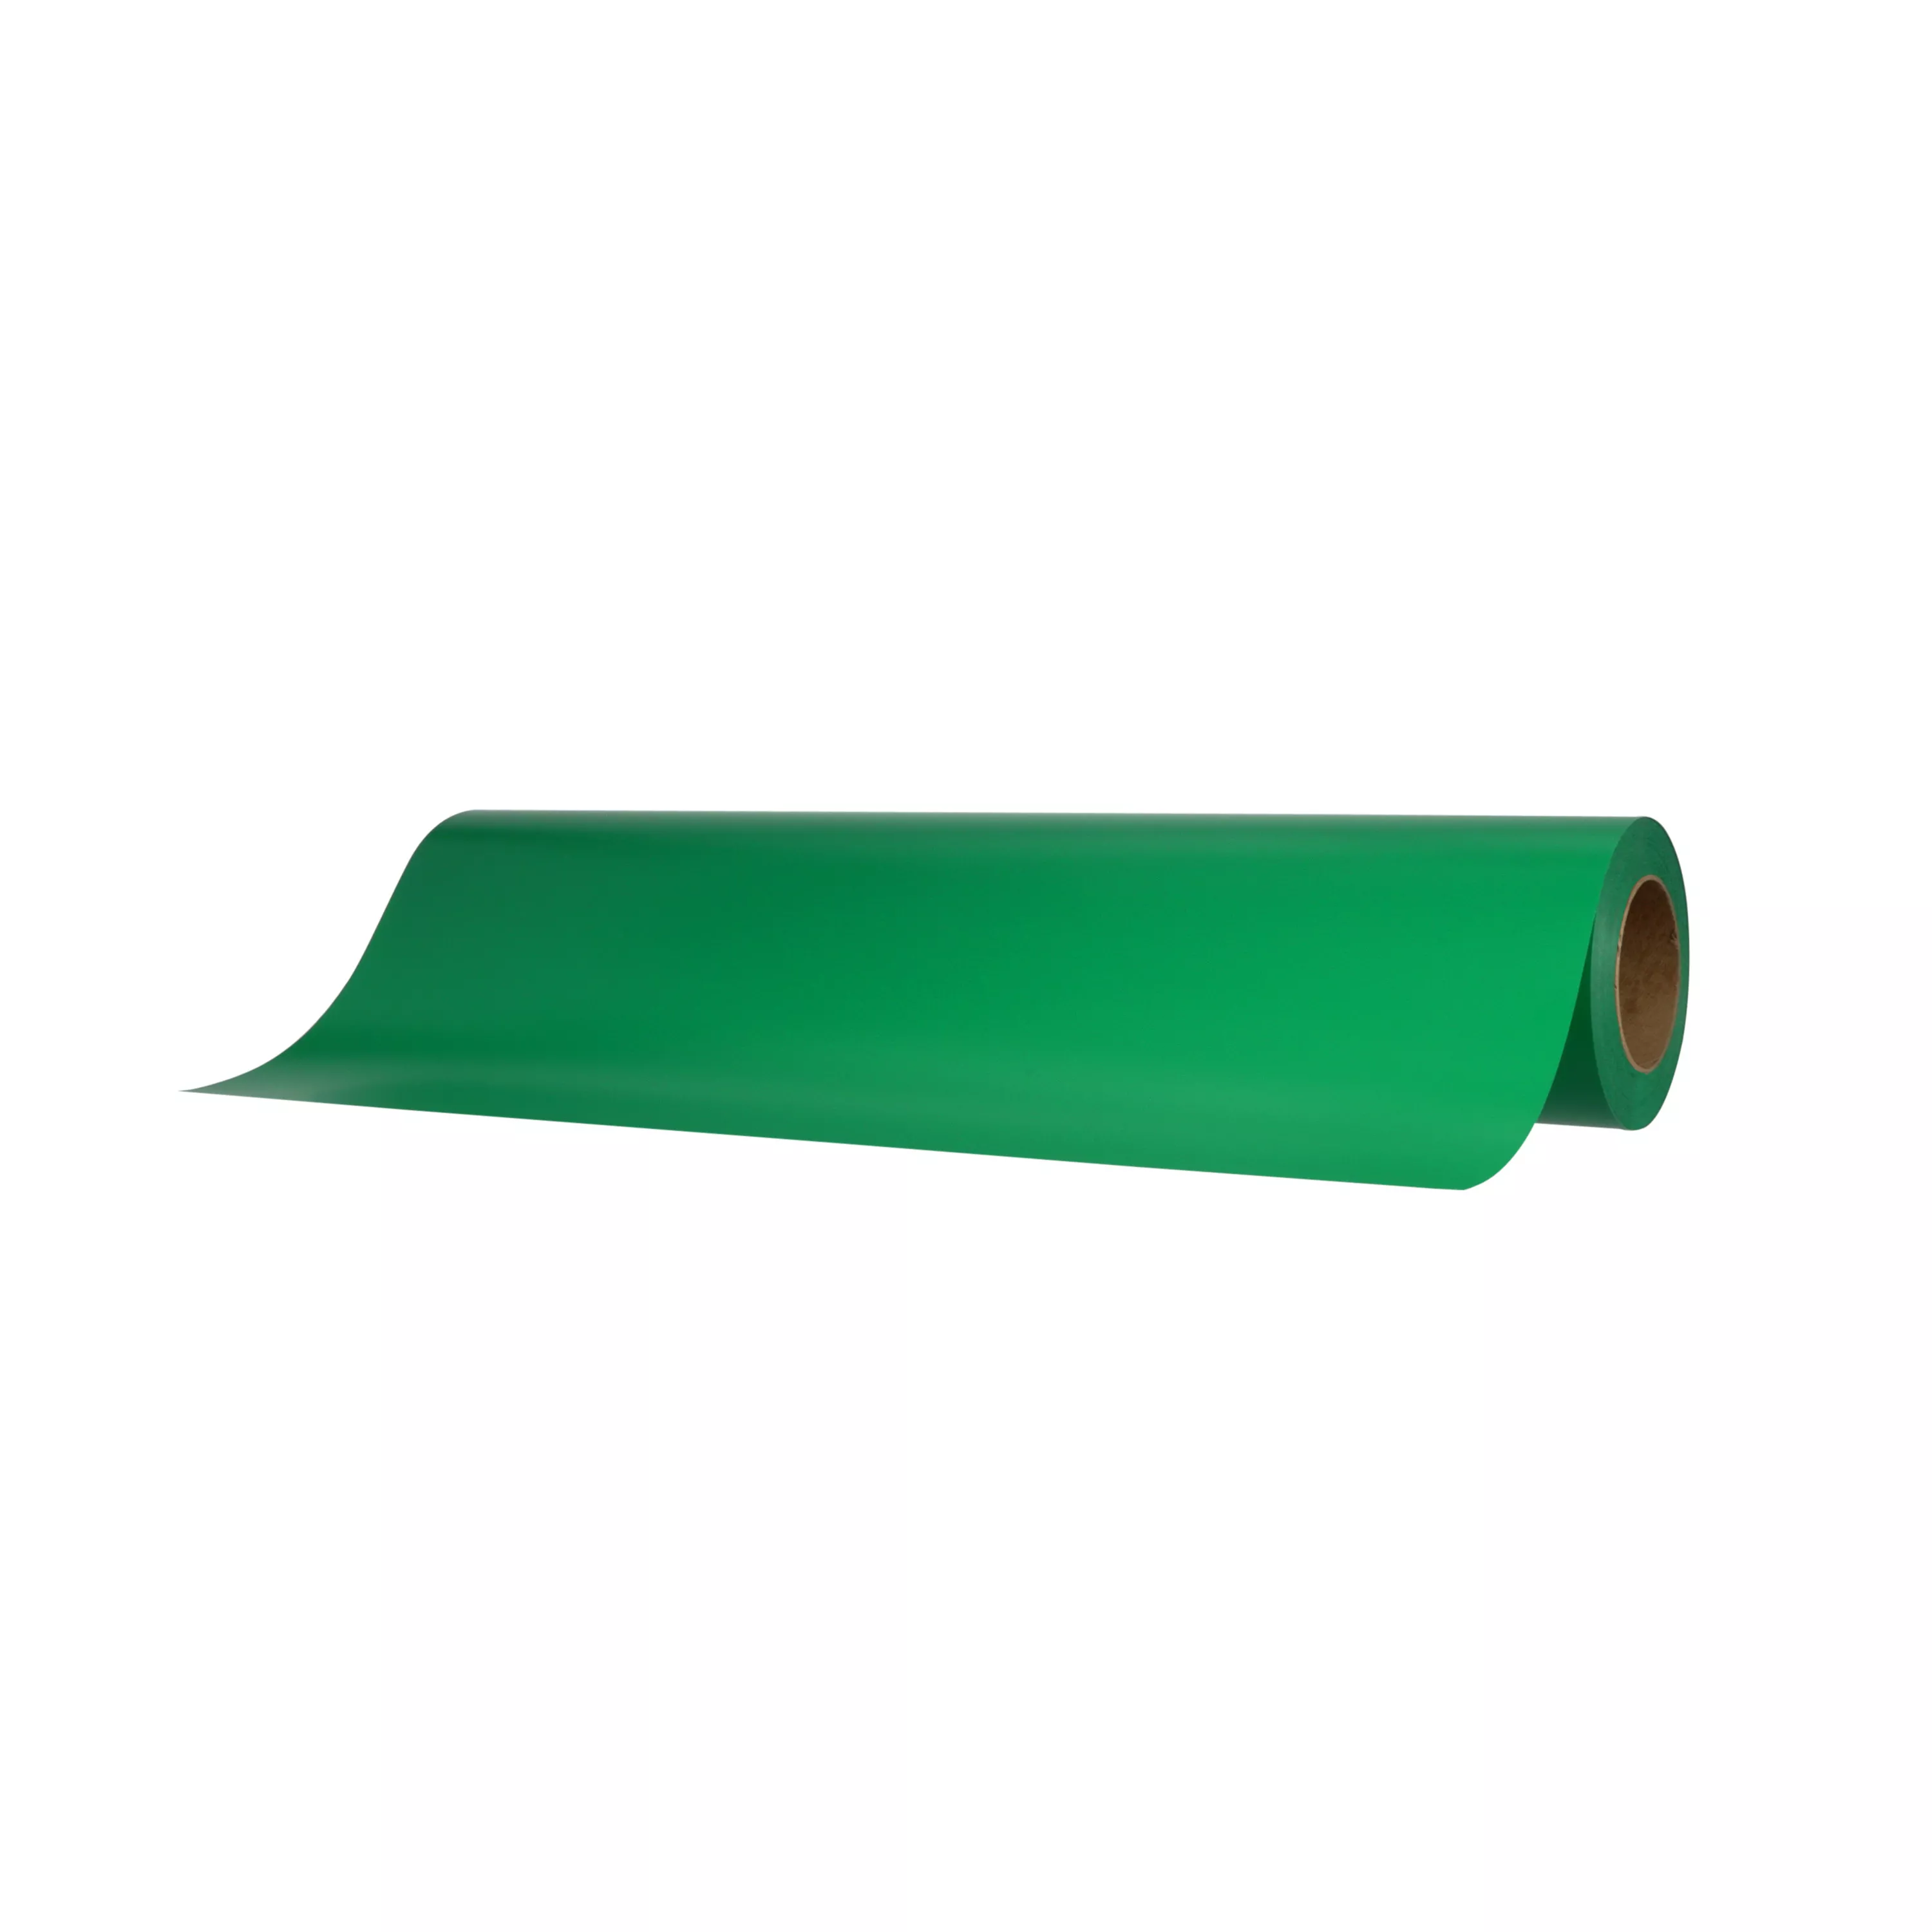 3M™ Scotchcal™ Translucent Graphic Film 3630-196, Forest, 48 in x 50 yd,
1 Roll/Case